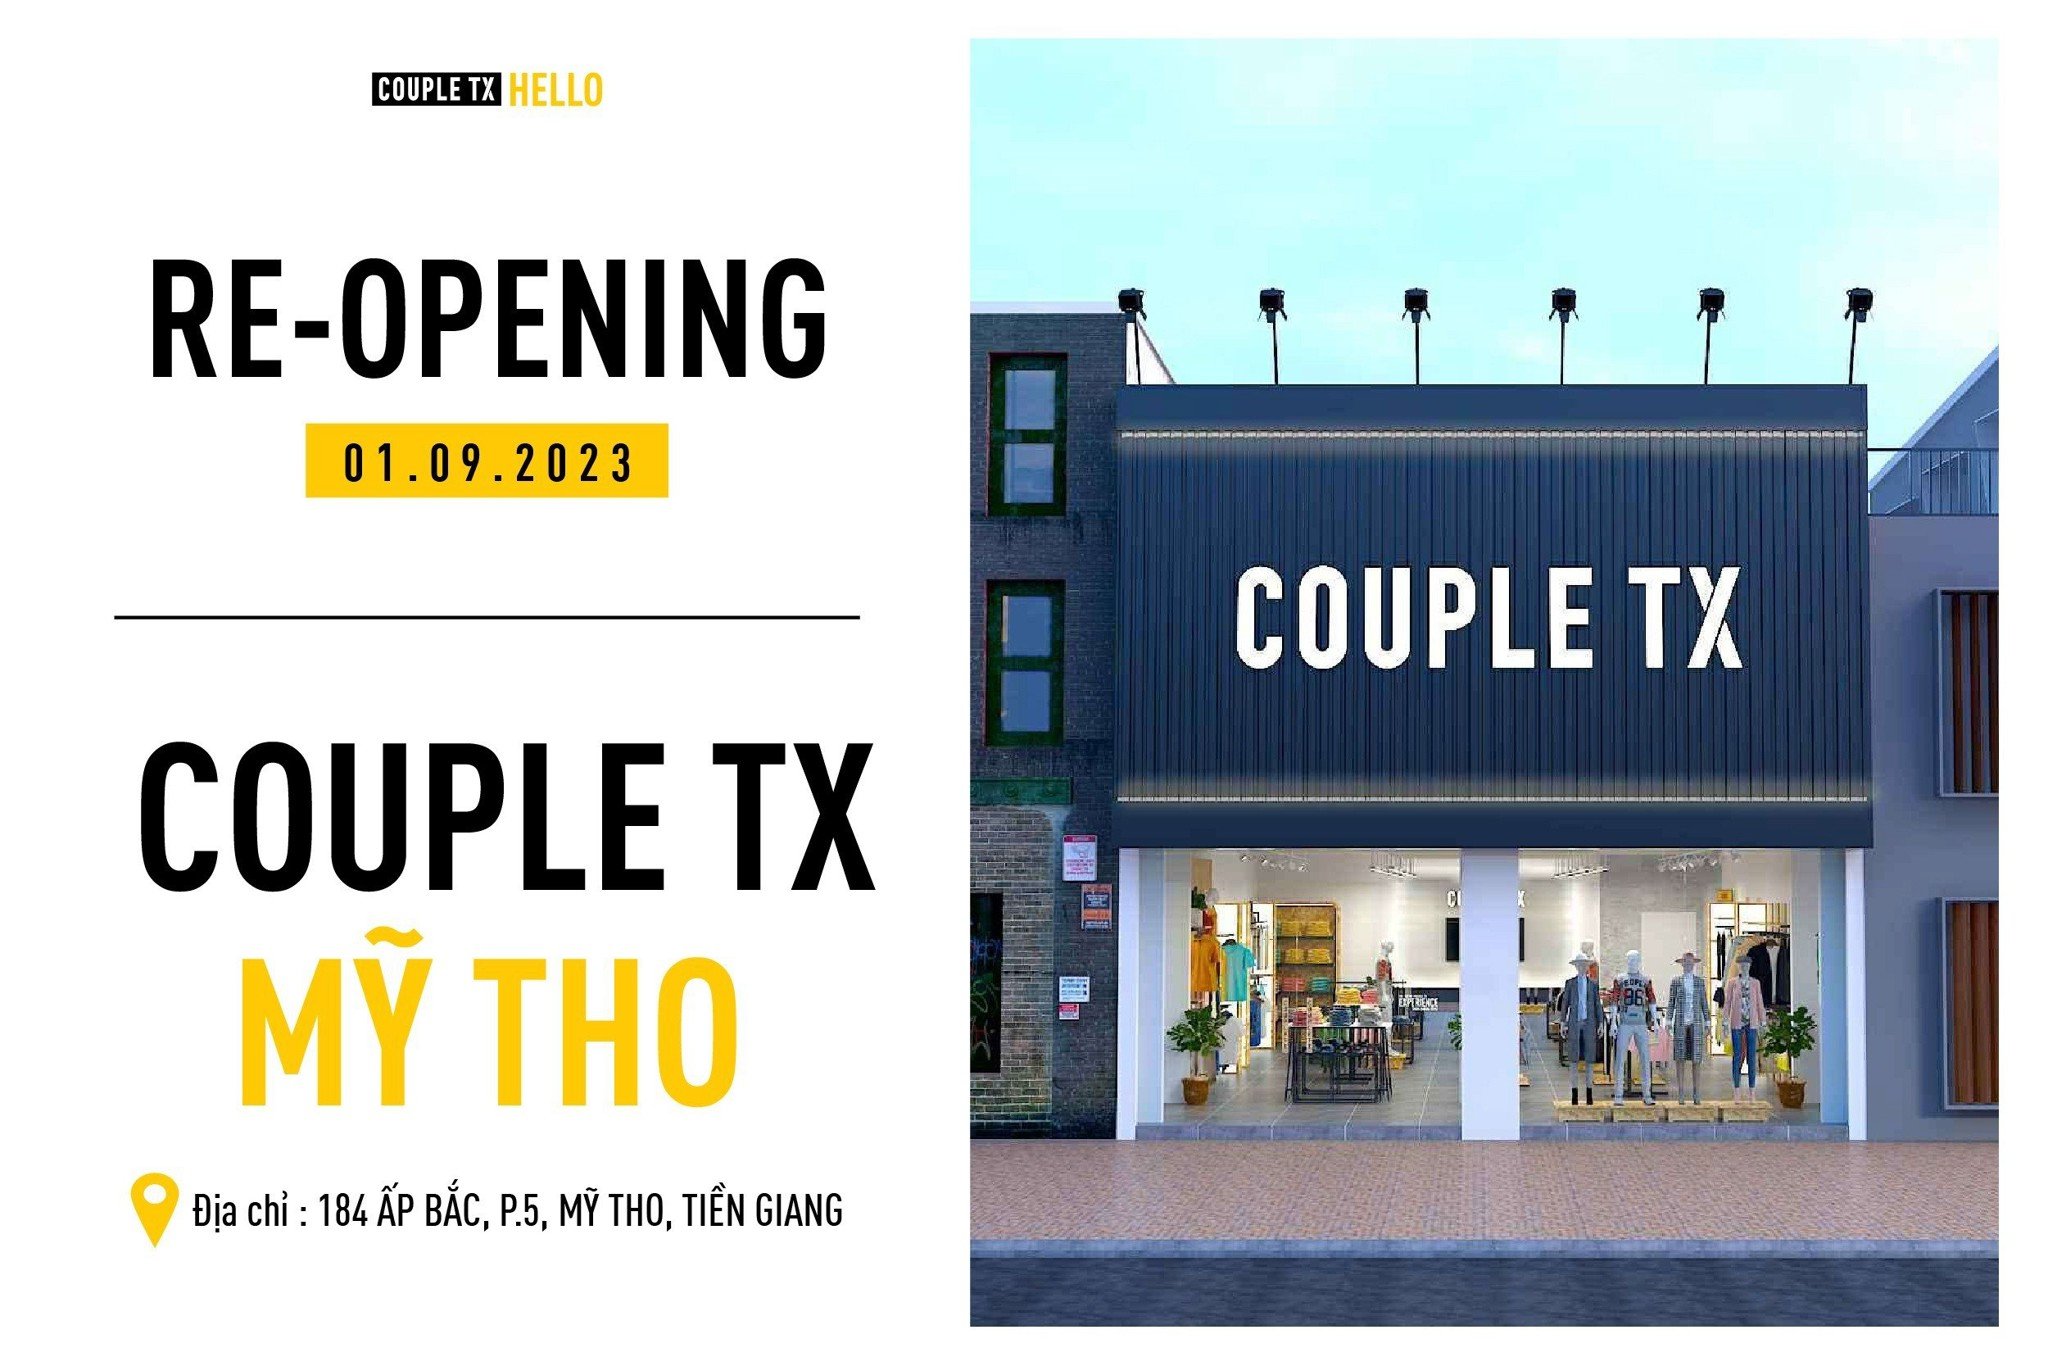 [RE-OPENING] COUPLE TX MỸ THO 01.09.2023